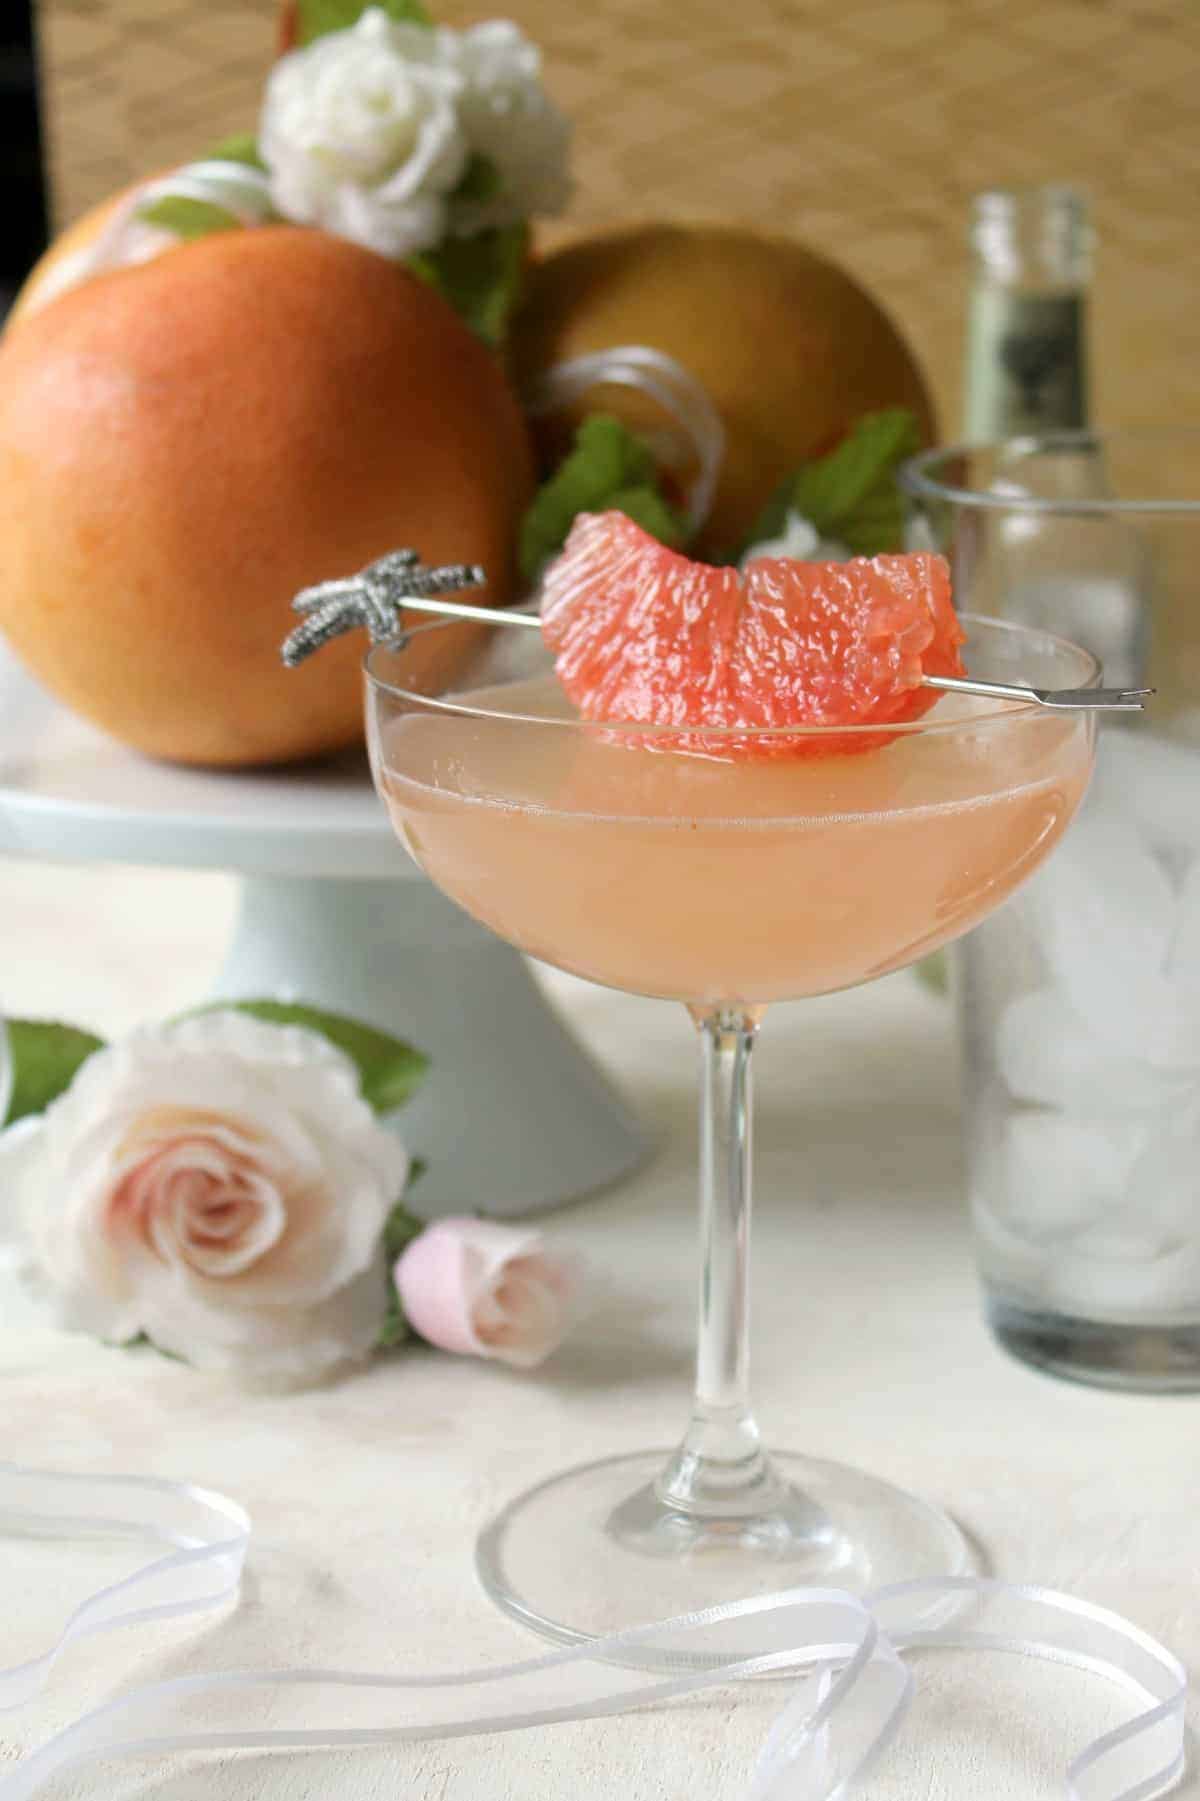 This Grapefruit Ginger Cocktail makes a refreshing elixir with a mildly spicy zing. Fresh squeezed grapefruit juice lends citrusy sweetness to the drink, while ginger beer gives the unassuming beverage effervescence and a touch of heat. Mix it up to sip on for a special celebration or a weekend treat!